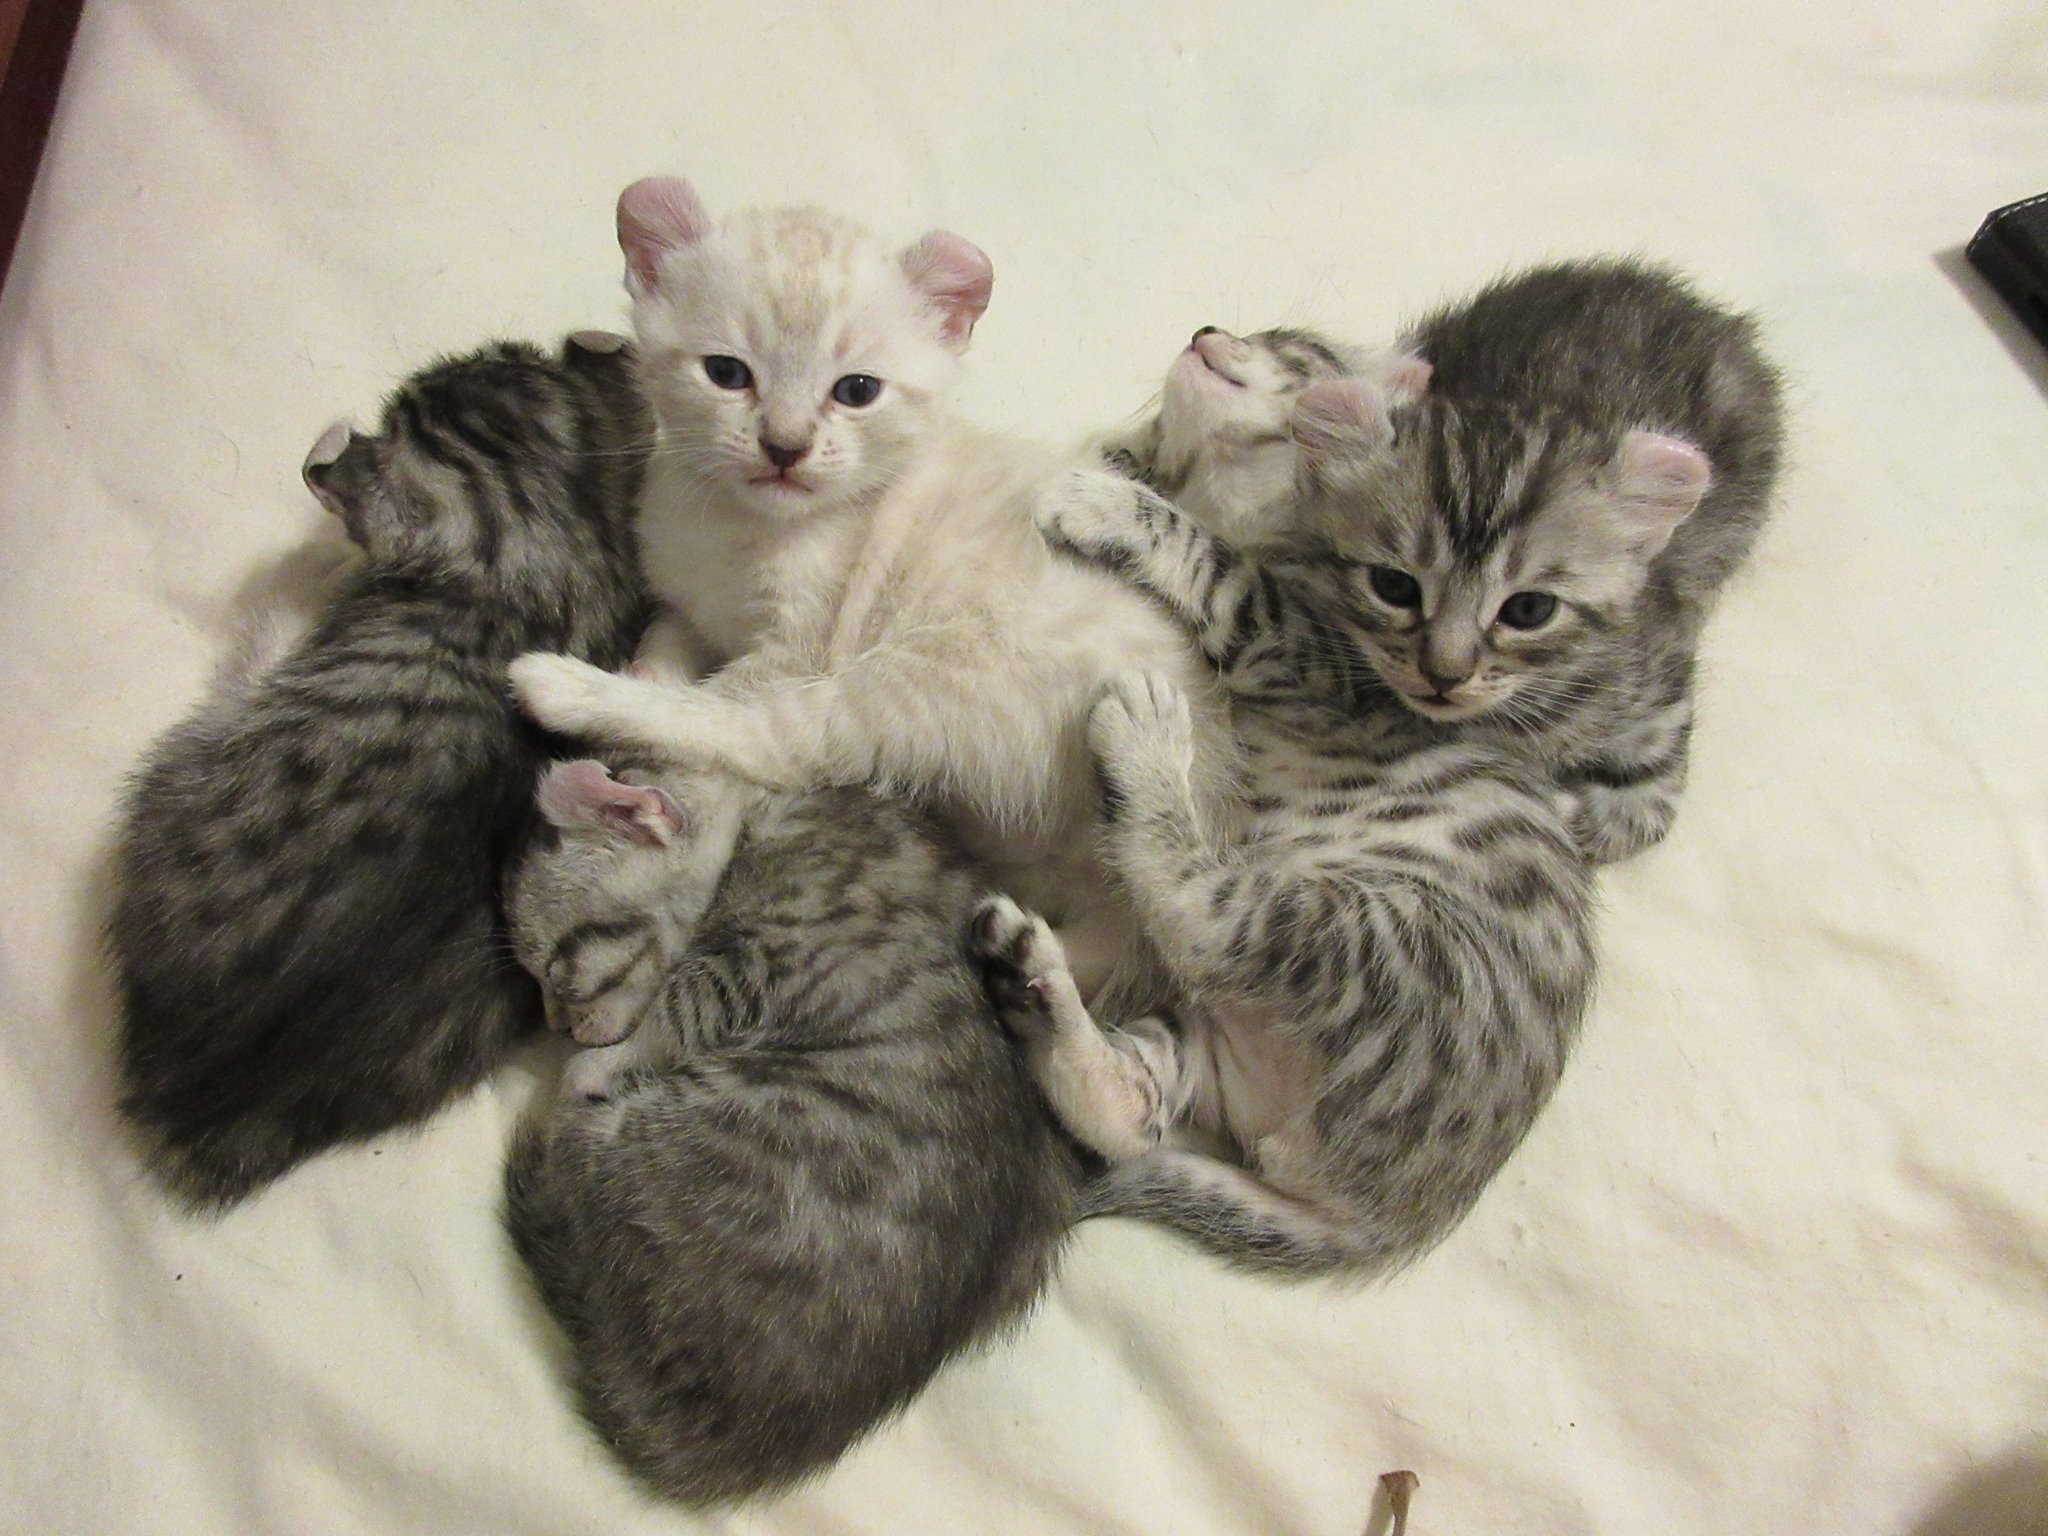 Before Buying Our Kittens…